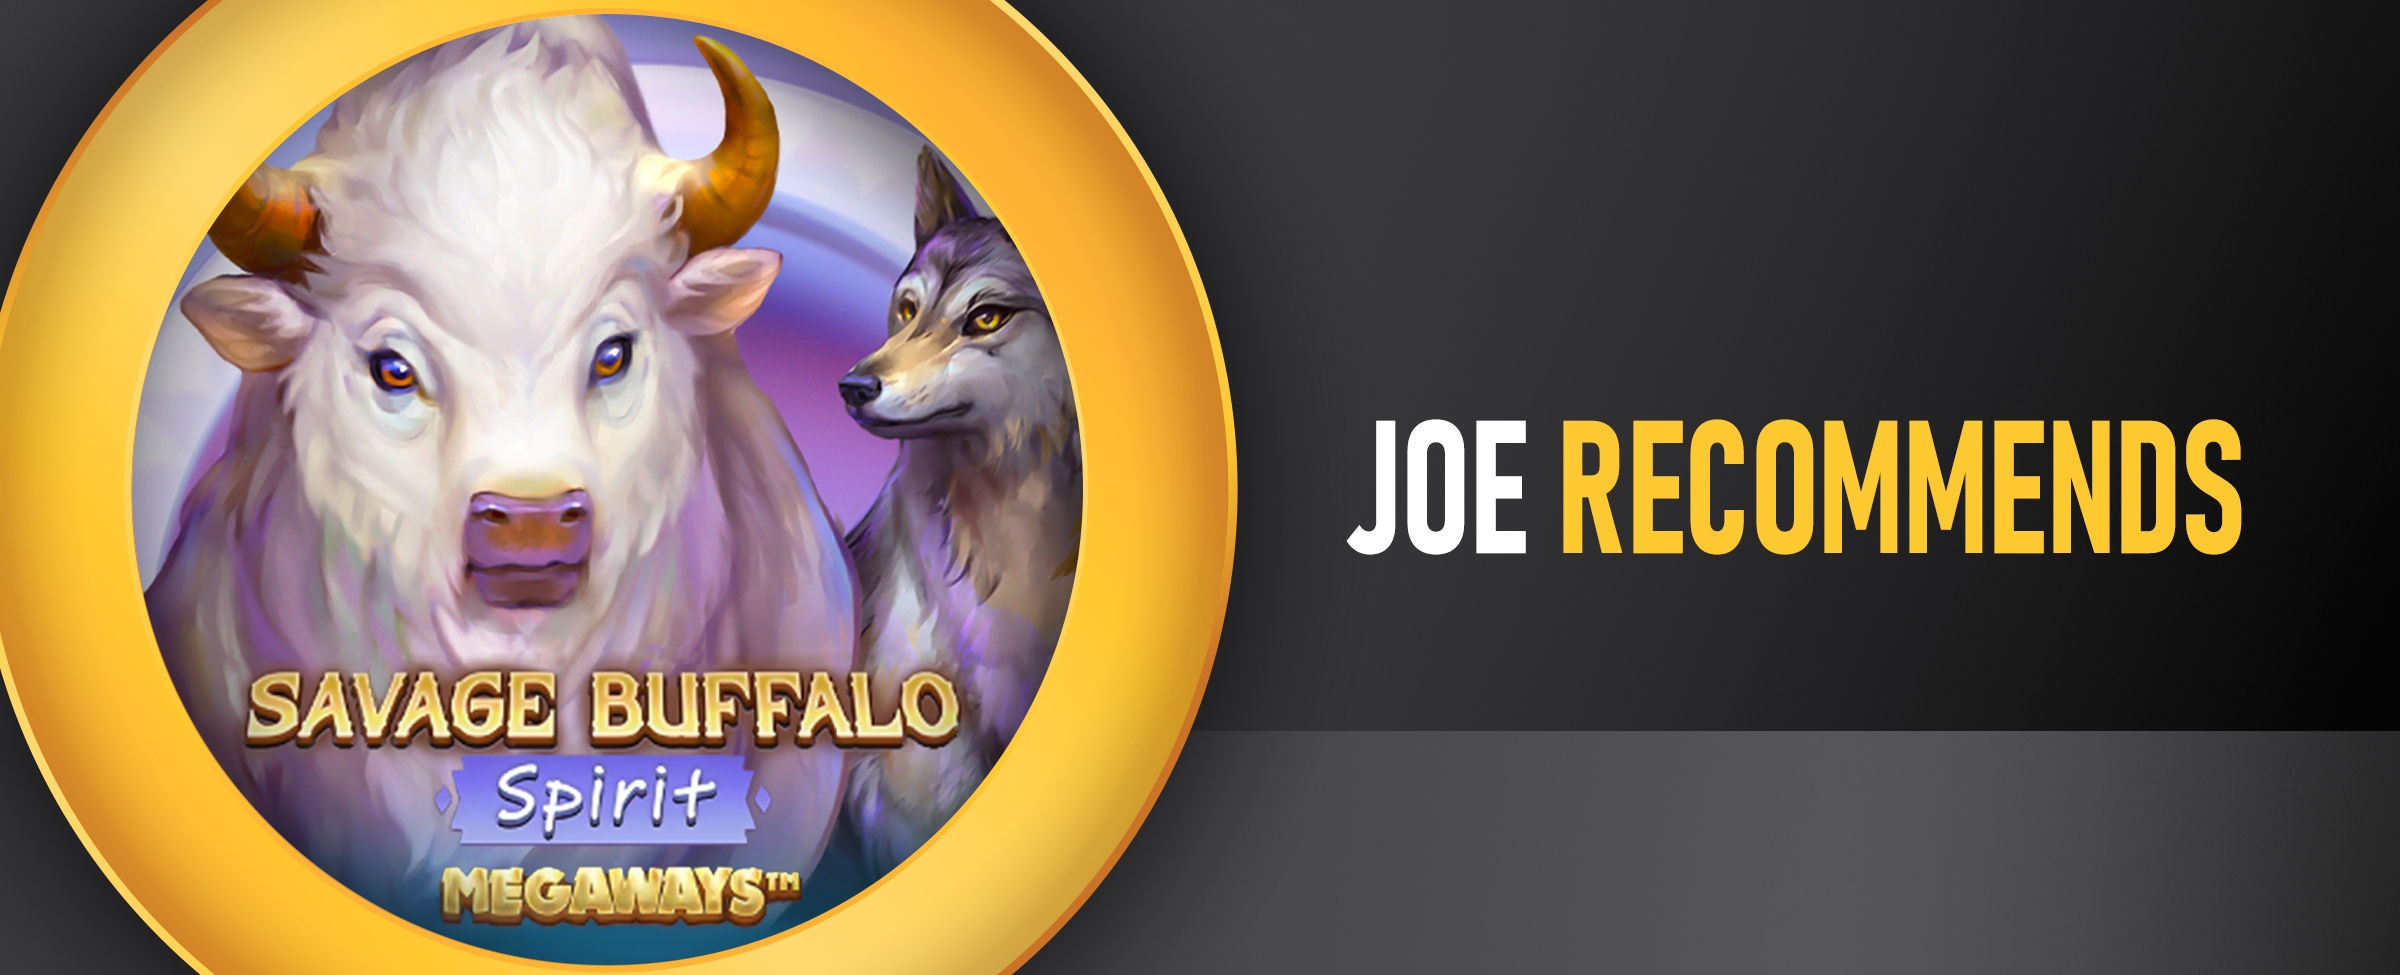 The logo for the Joe Fortune online slot, Savage Buffalo Spirit features alongside the wording ‘Joe Recommends’. On a green background. 